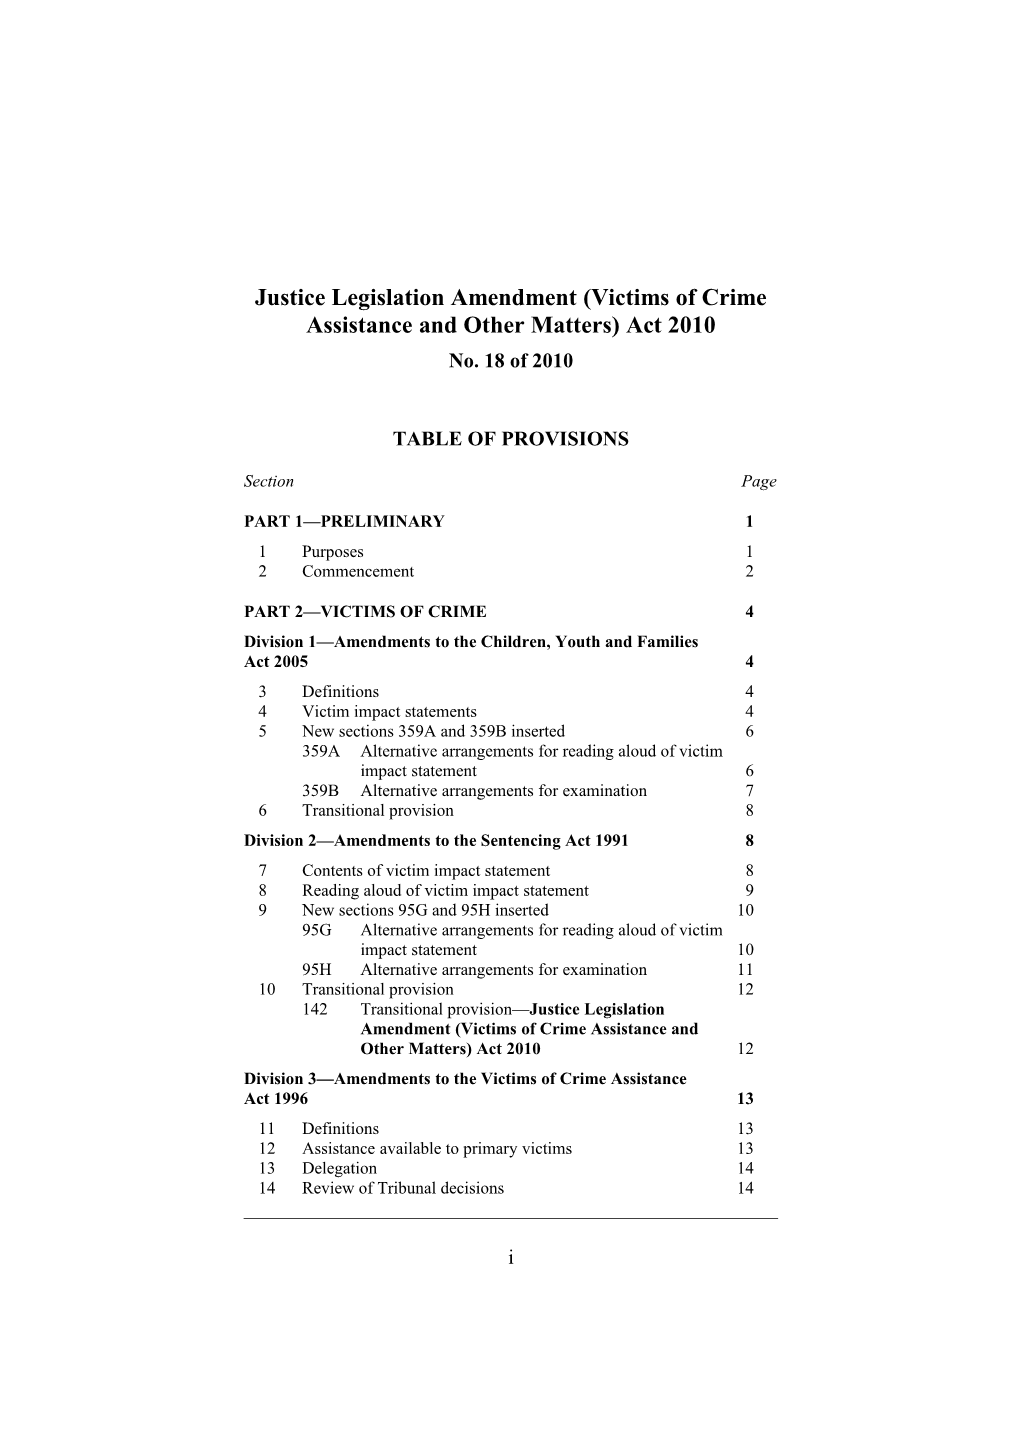 Justice Legislation Amendment (Victims of Crime Assistance and Other Matters) Act 2010